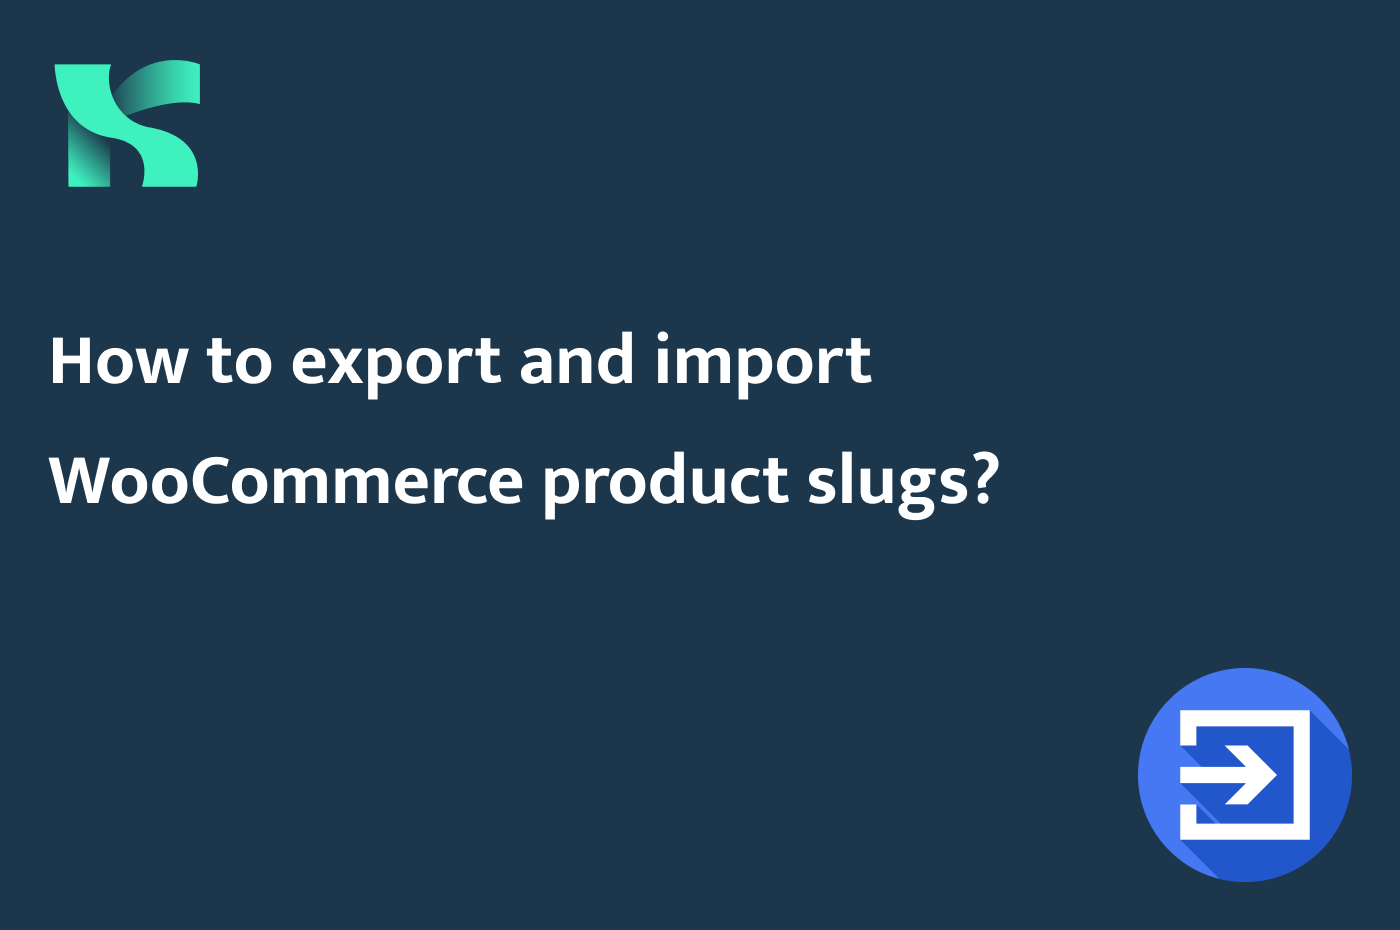 How to export and import WooCommerce product slugs?